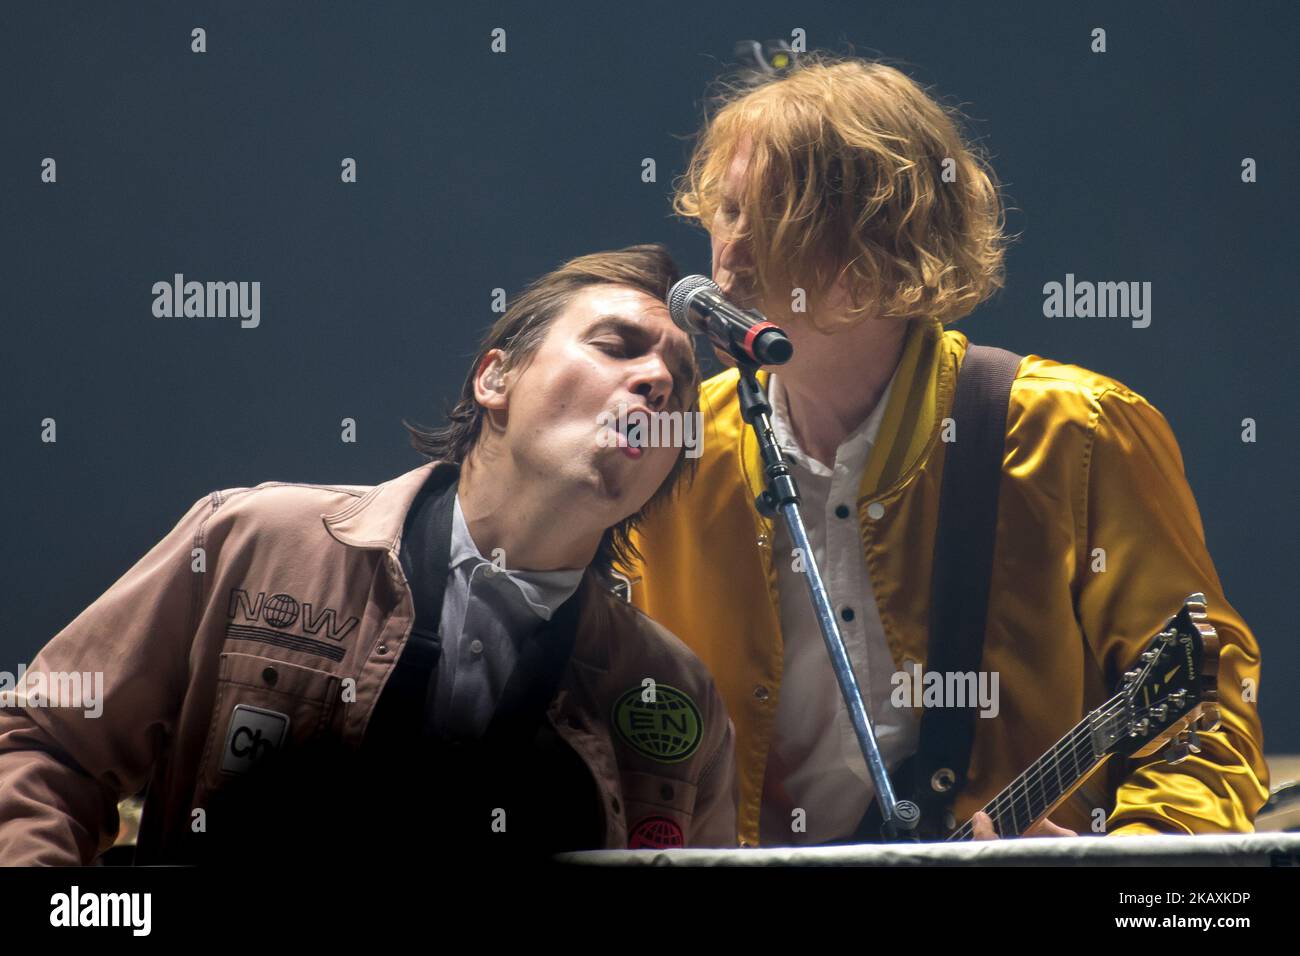 Canadian indie rock band Arcade FIre is pictured on atage as they perform at Arena Wembley, London on April 12, 2018. Arcade Fire is a Canadian indie rock band, consisting of husband and wife Win Butler (vocals, bass, guitar) and Régine Chassagne, along with Win's younger brother William Butler, Richard Reed Parry, Tim Kingsbury and Jeremy Gara. The band's current touring line-up also includes former core member Sarah Neufeld, percussionist Tiwill Duprate and saxophonist Stuart Bogie. (Photo by Alberto Pezzali/NurPhoto) Stock Photo